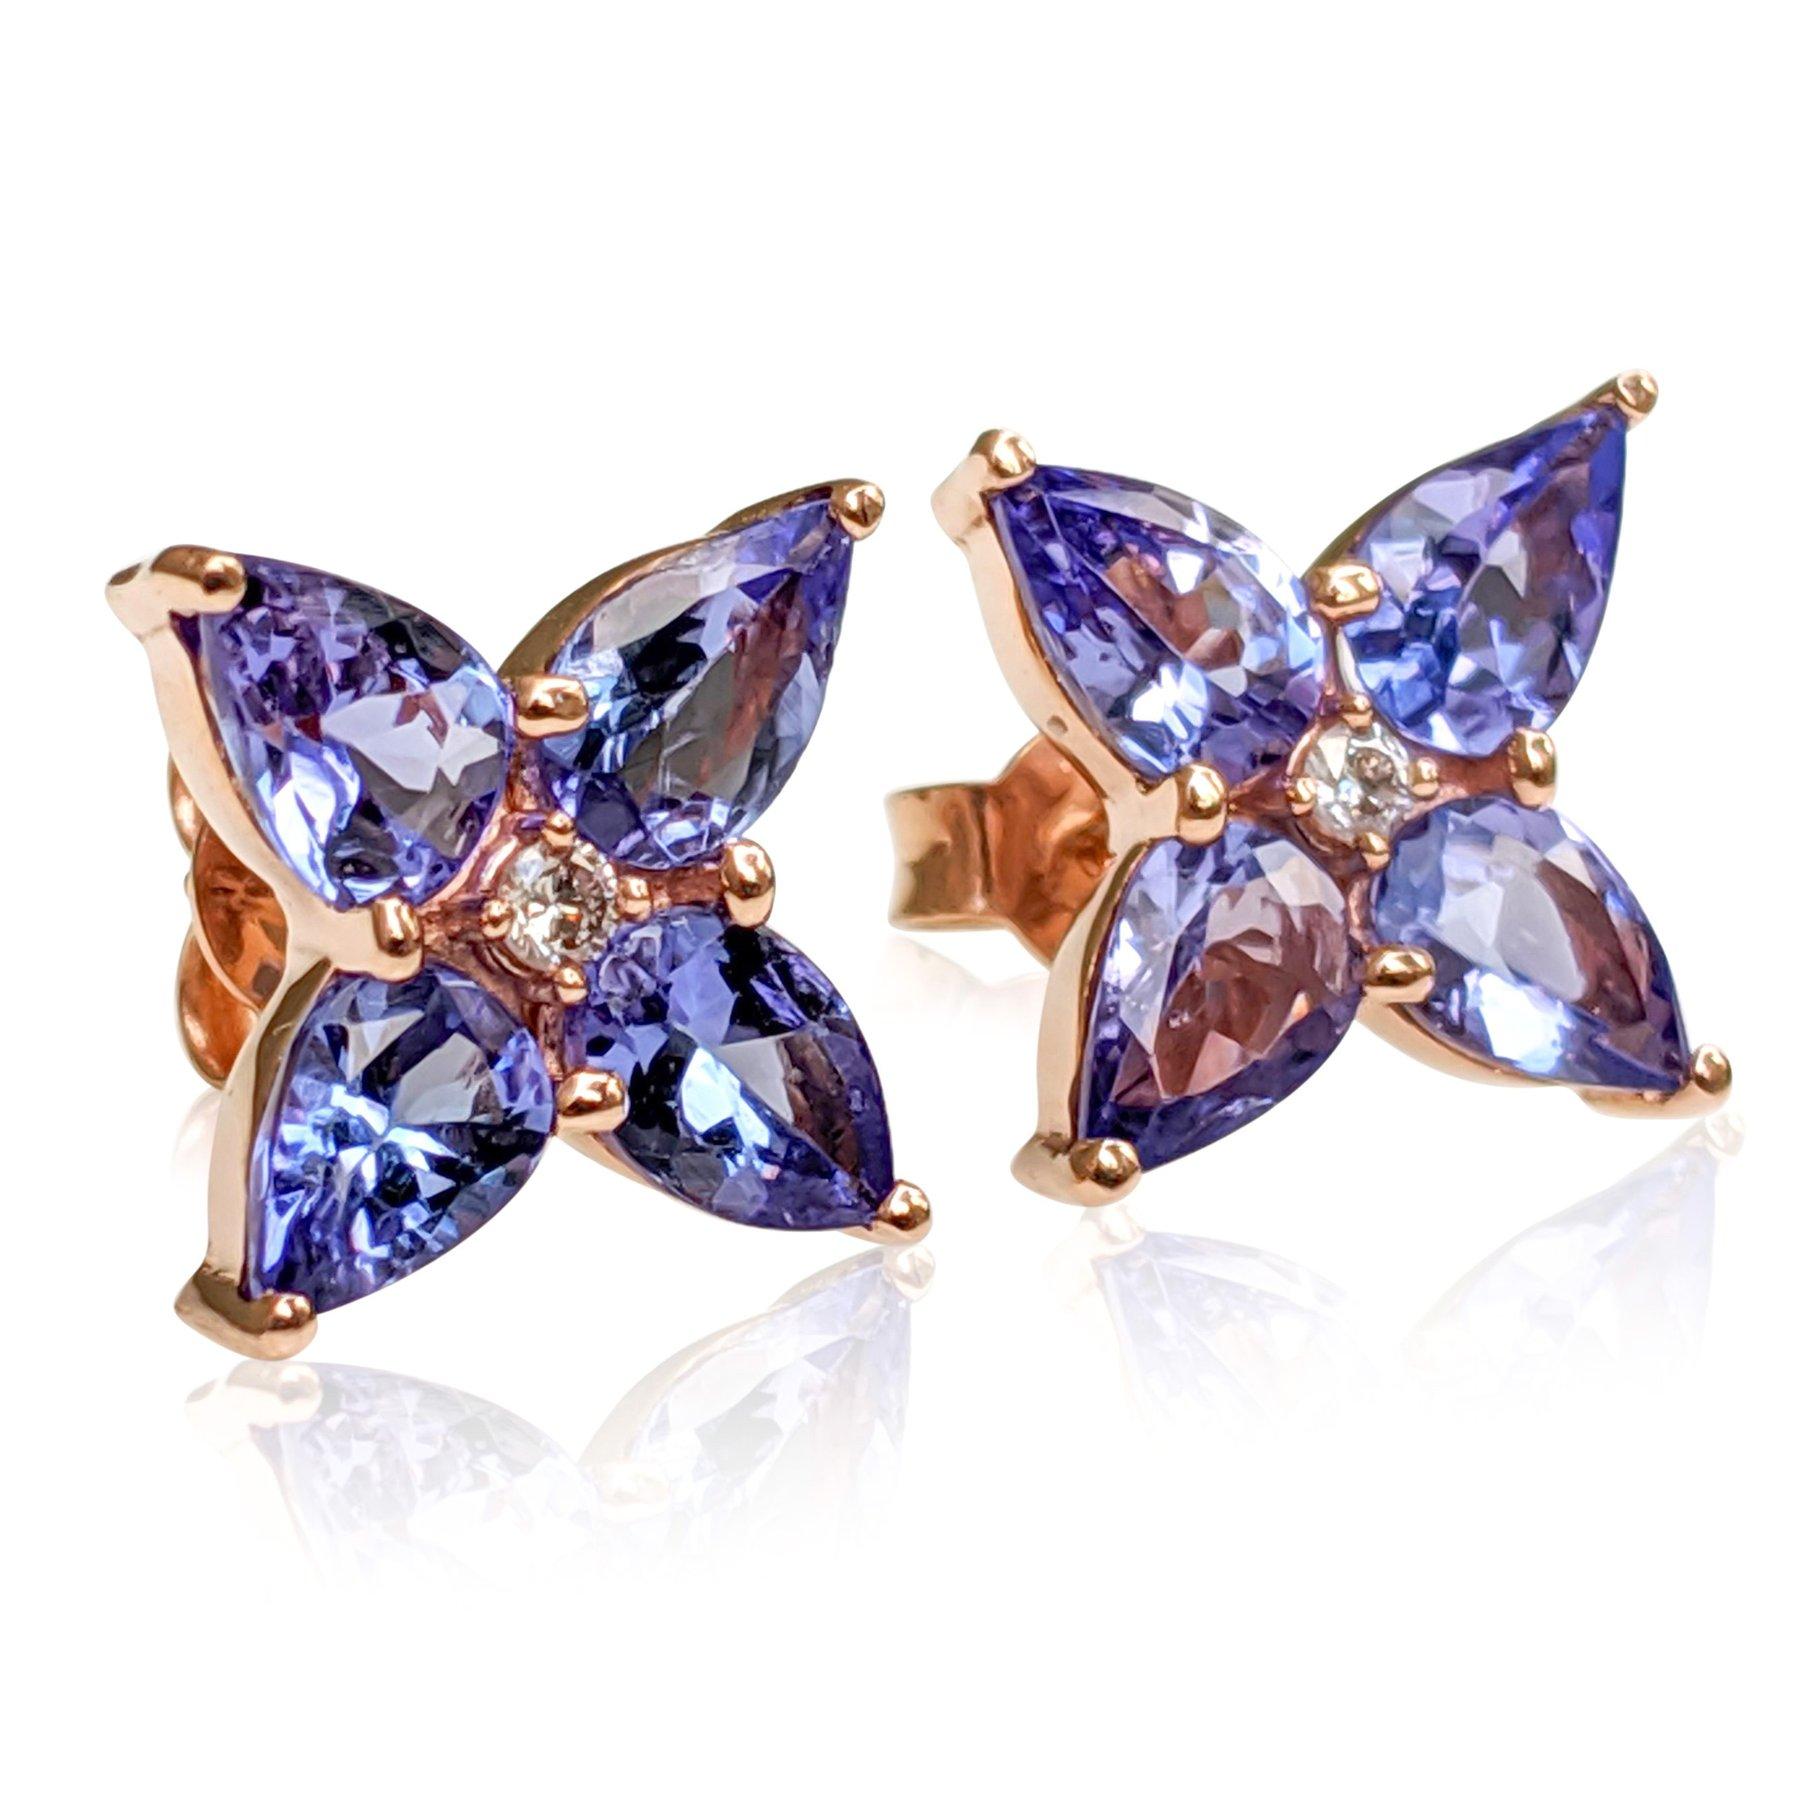 Women's NO RESERVE! 2.78Ct Tanzanite and 0.02Ct Diamonds - 14 kt. Pink gold - Earrings For Sale